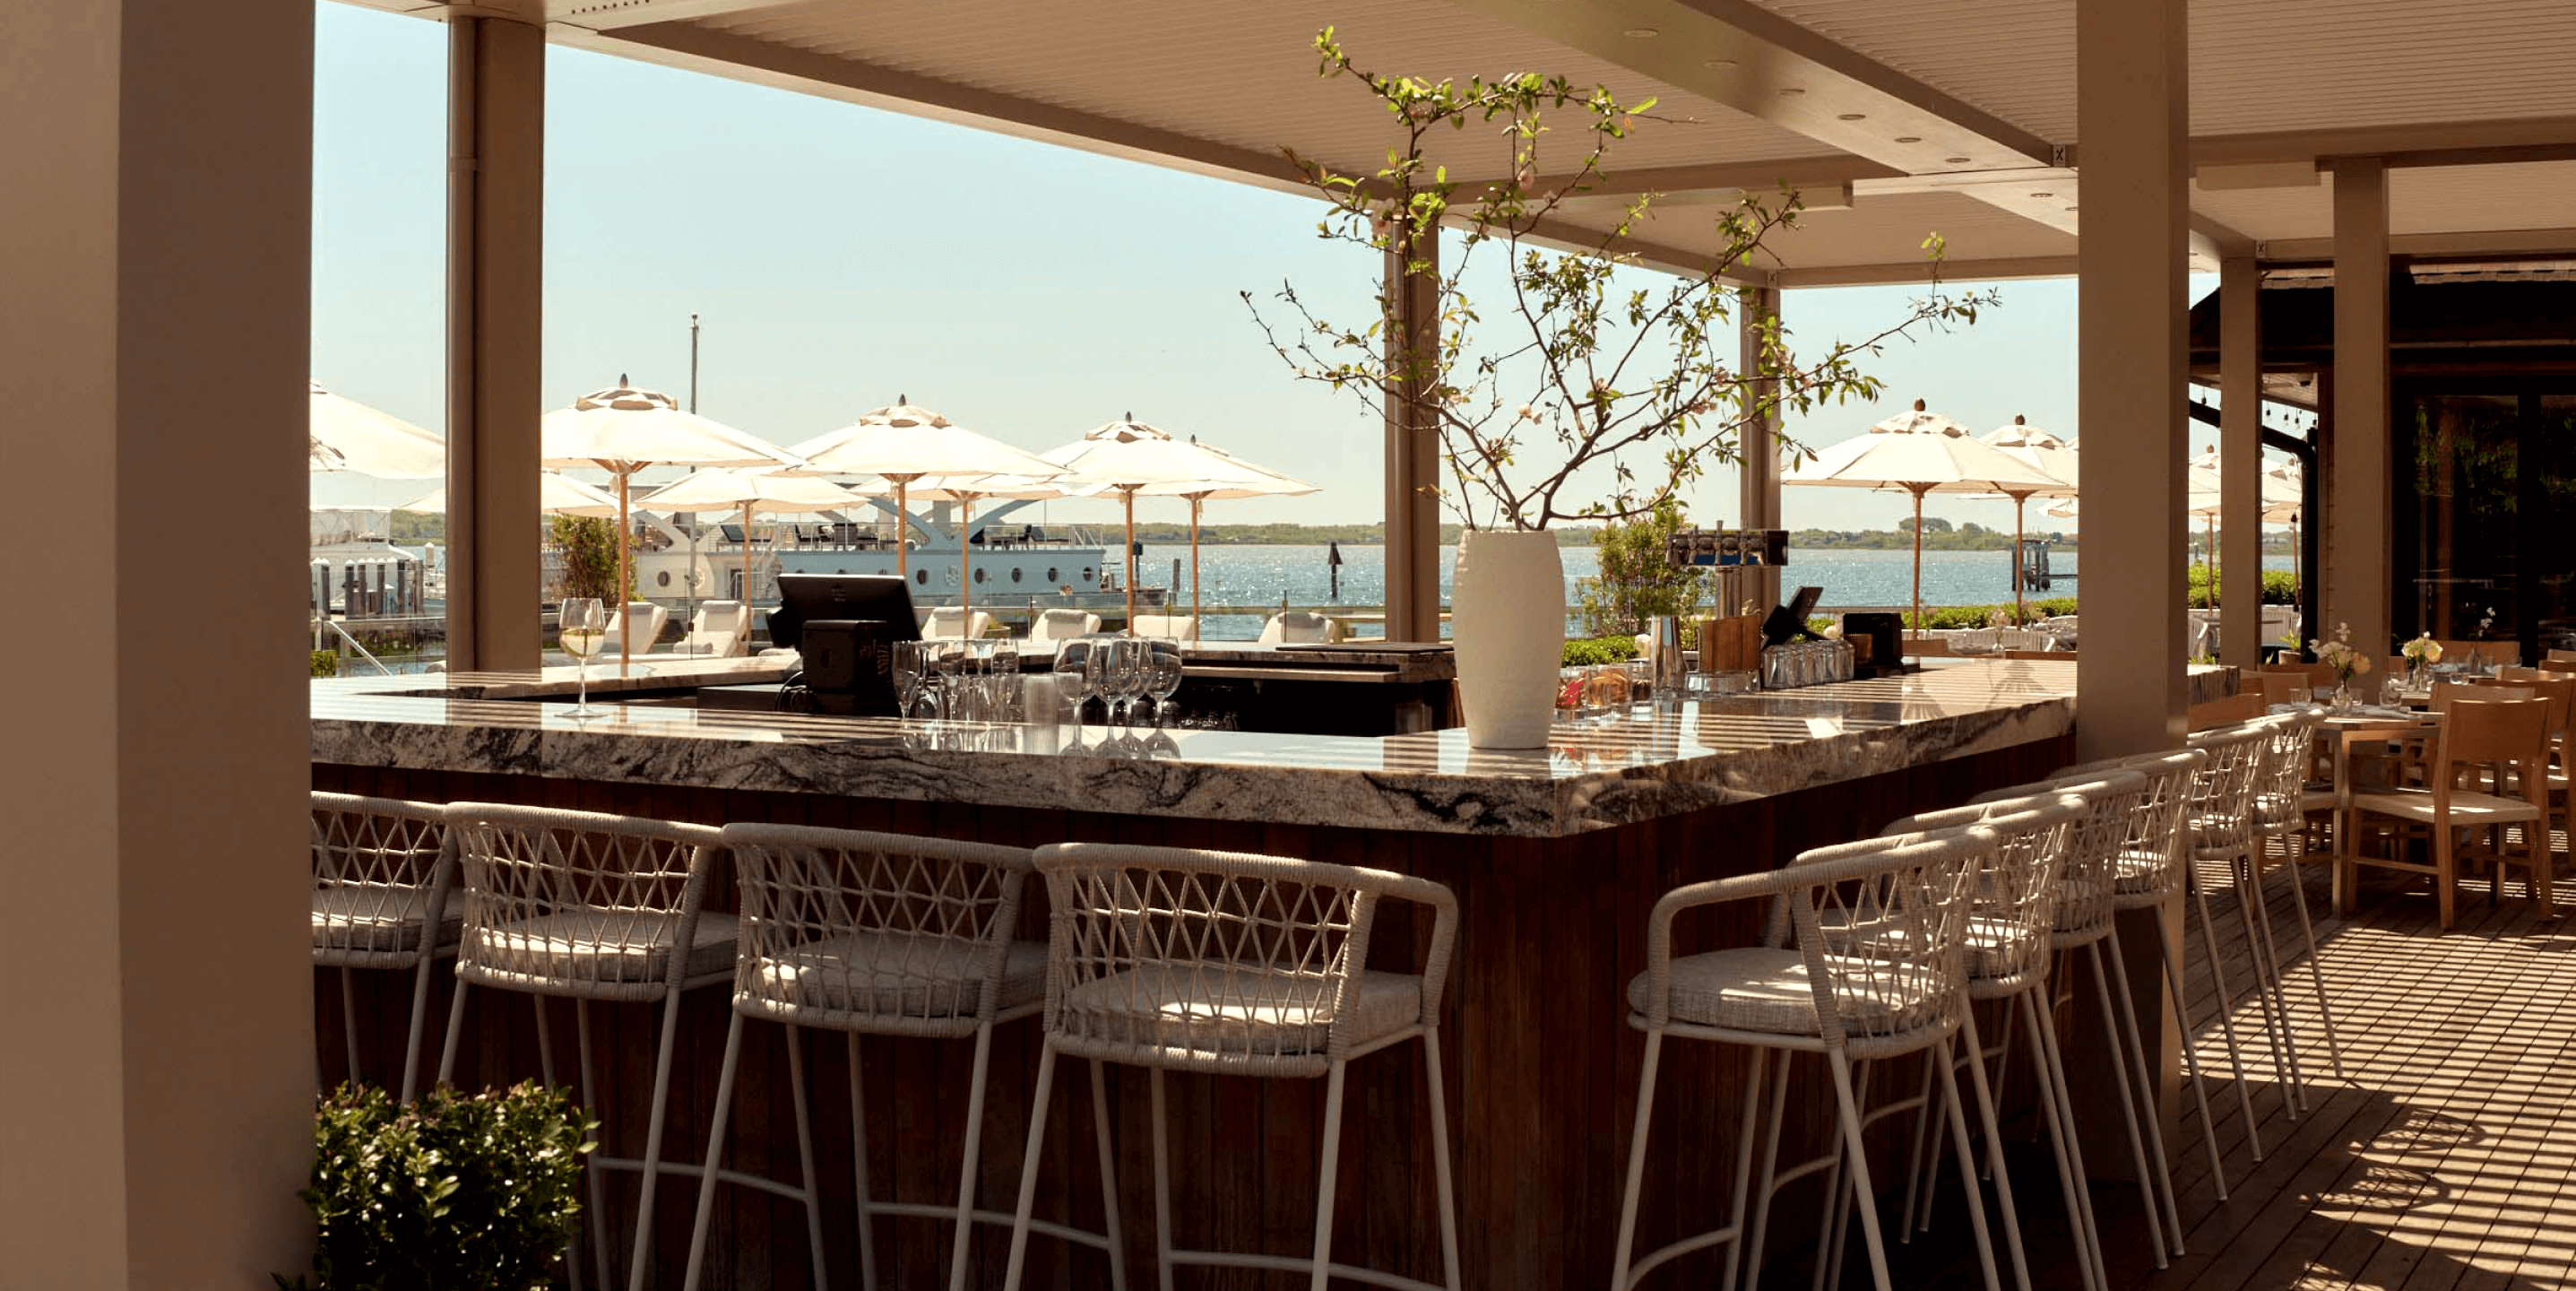 Long chairs next to the bar counter offer a stunning view of the sea.